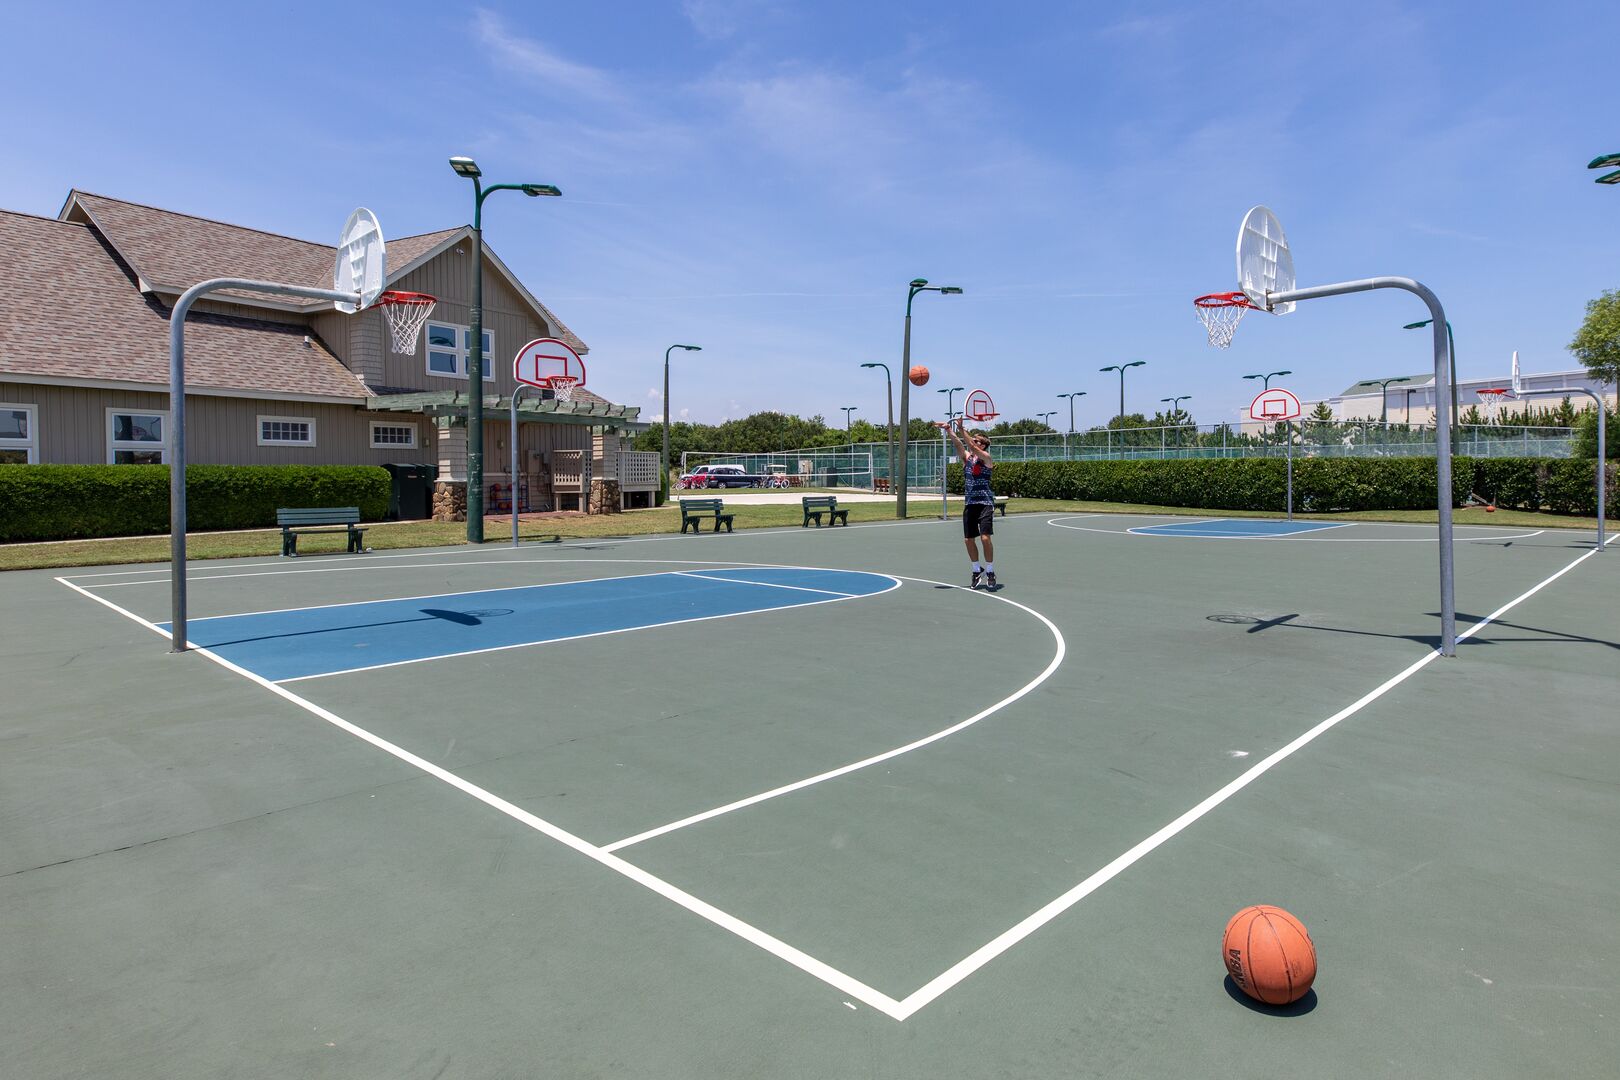 The Currituck Club Basketball Courts